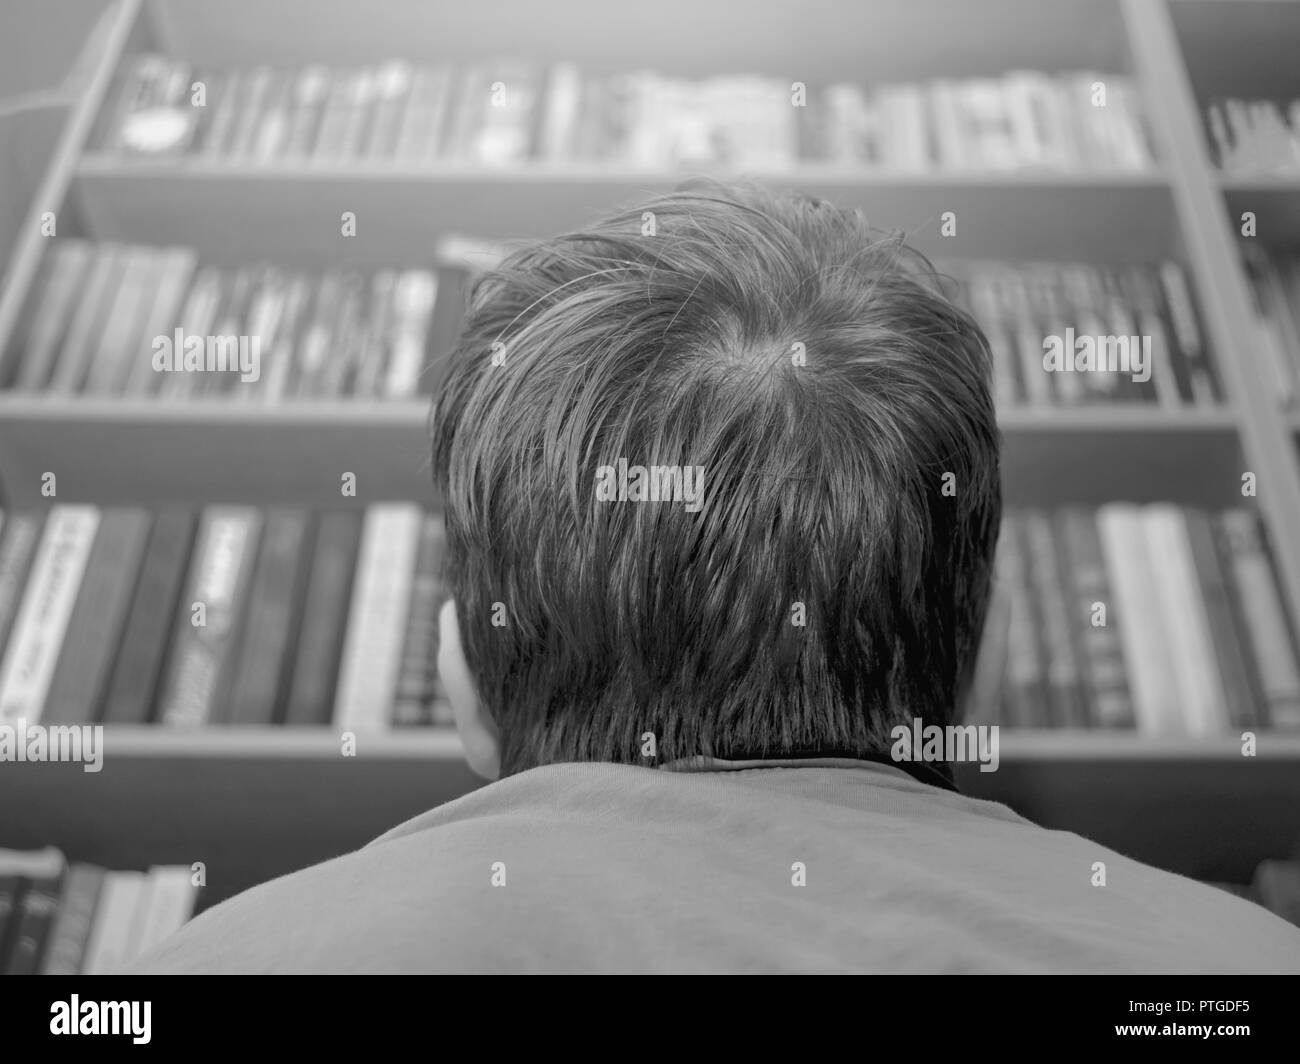 Boy, Student Looking Up The Bookshelves At Home, School, Library Or A Bookstore. Academic Education, Hard Learning Concept. Stock Photo